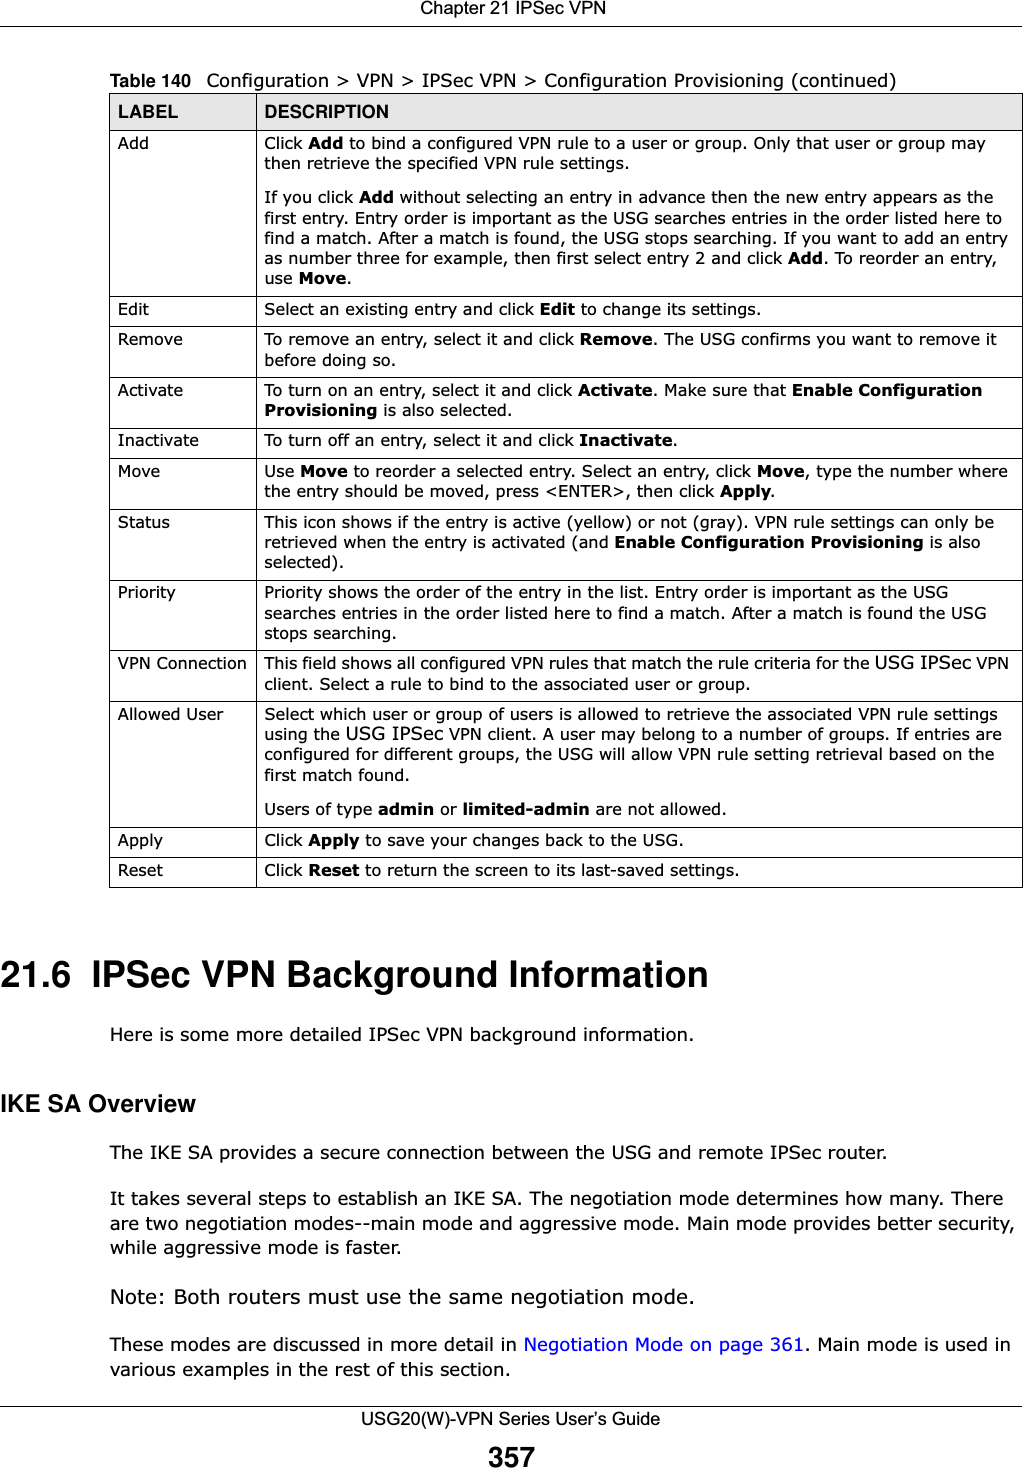  Chapter 21 IPSec VPNUSG20(W)-VPN Series User’s Guide35721.6  IPSec VPN Background InformationHere is some more detailed IPSec VPN background information.IKE SA OverviewThe IKE SA provides a secure connection between the USG and remote IPSec router.It takes several steps to establish an IKE SA. The negotiation mode determines how many. There are two negotiation modes--main mode and aggressive mode. Main mode provides better security, while aggressive mode is faster.Note: Both routers must use the same negotiation mode.These modes are discussed in more detail in Negotiation Mode on page 361. Main mode is used in various examples in the rest of this section.Add Click Add to bind a configured VPN rule to a user or group. Only that user or group may then retrieve the specified VPN rule settings.If you click Add without selecting an entry in advance then the new entry appears as the first entry. Entry order is important as the USG searches entries in the order listed here to find a match. After a match is found, the USG stops searching. If you want to add an entry as number three for example, then first select entry 2 and click Add. To reorder an entry, use Move.Edit Select an existing entry and click Edit to change its settings.Remove To remove an entry, select it and click Remove. The USG confirms you want to remove it before doing so.Activate To turn on an entry, select it and click Activate. Make sure that Enable Configuration Provisioning is also selected.Inactivate To turn off an entry, select it and click Inactivate.Move Use Move to reorder a selected entry. Select an entry, click Move, type the number where the entry should be moved, press &lt;ENTER&gt;, then click Apply. Status This icon shows if the entry is active (yellow) or not (gray). VPN rule settings can only be retrieved when the entry is activated (and Enable Configuration Provisioning is also selected).Priority Priority shows the order of the entry in the list. Entry order is important as the USG searches entries in the order listed here to find a match. After a match is found the USG stops searching. VPN Connection This field shows all configured VPN rules that match the rule criteria for the USG IPSec VPN client. Select a rule to bind to the associated user or group.Allowed User Select which user or group of users is allowed to retrieve the associated VPN rule settings using the USG IPSec VPN client. A user may belong to a number of groups. If entries are configured for different groups, the USG will allow VPN rule setting retrieval based on the first match found.Users of type admin or limited-admin are not allowed.Apply Click Apply to save your changes back to the USG.Reset Click Reset to return the screen to its last-saved settings. Table 140   Configuration &gt; VPN &gt; IPSec VPN &gt; Configuration Provisioning (continued)LABEL DESCRIPTION